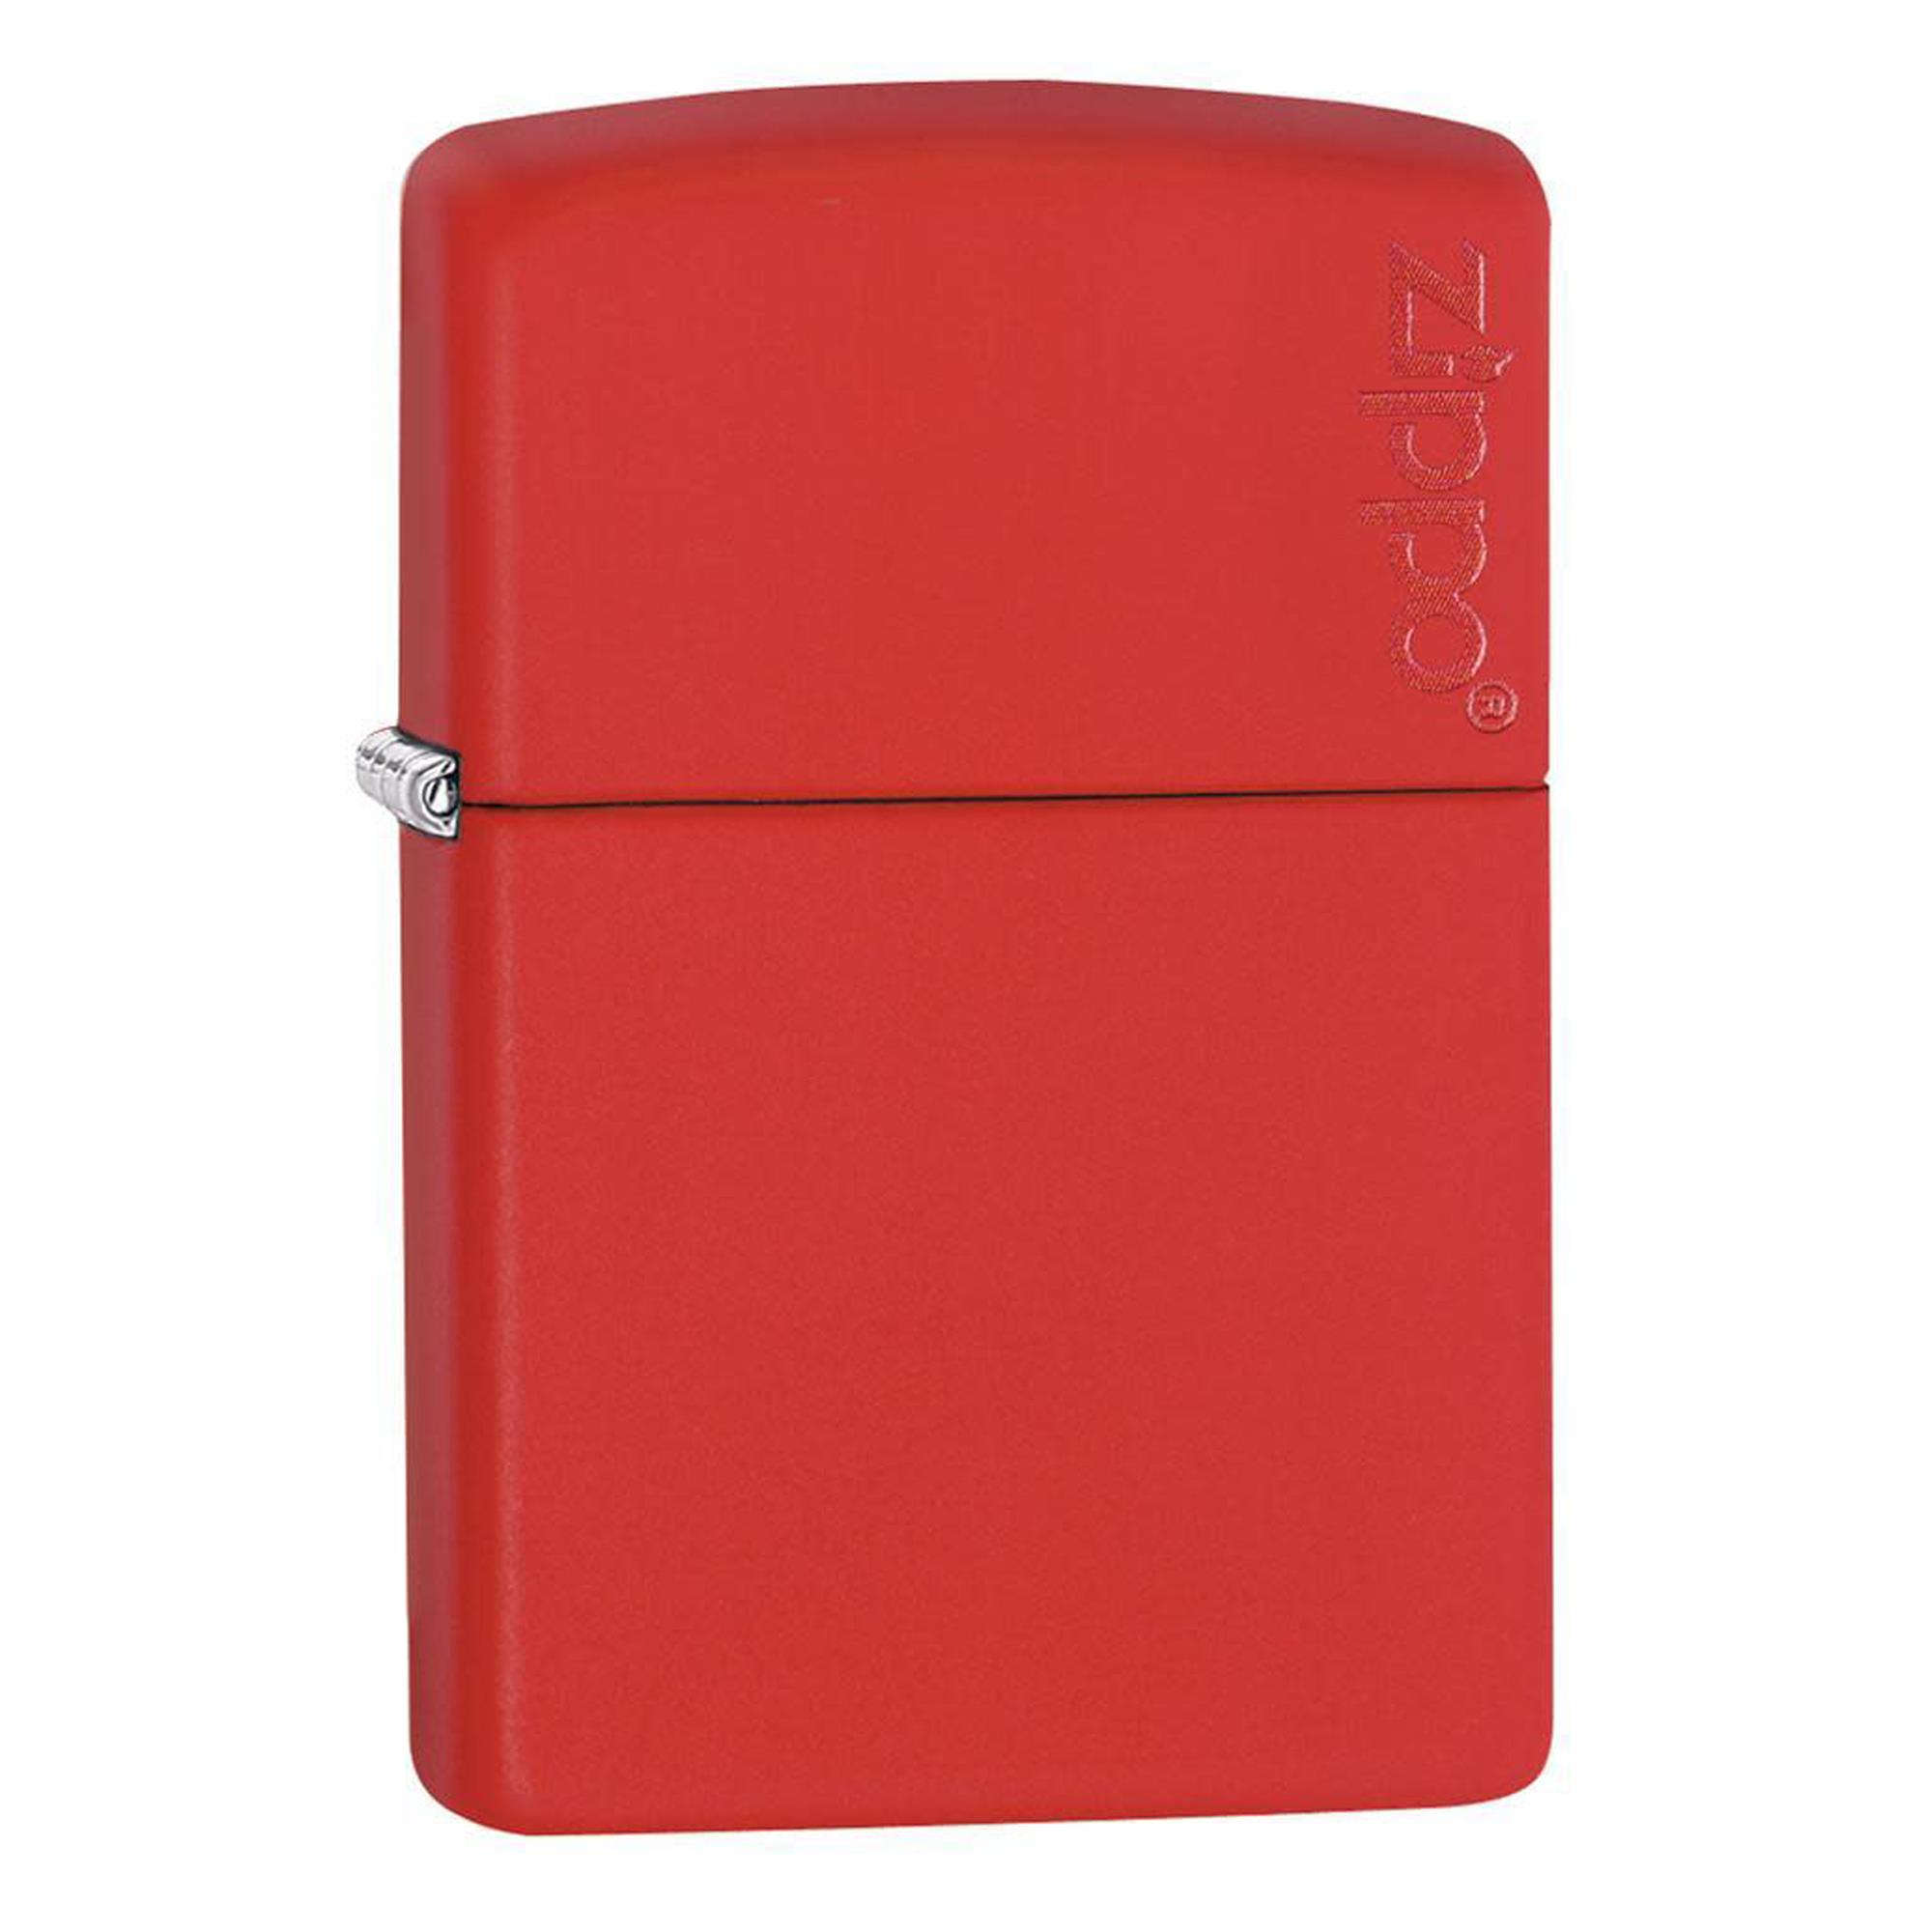 ZIPPO CLASSIC RED MATTE WITH LOGO